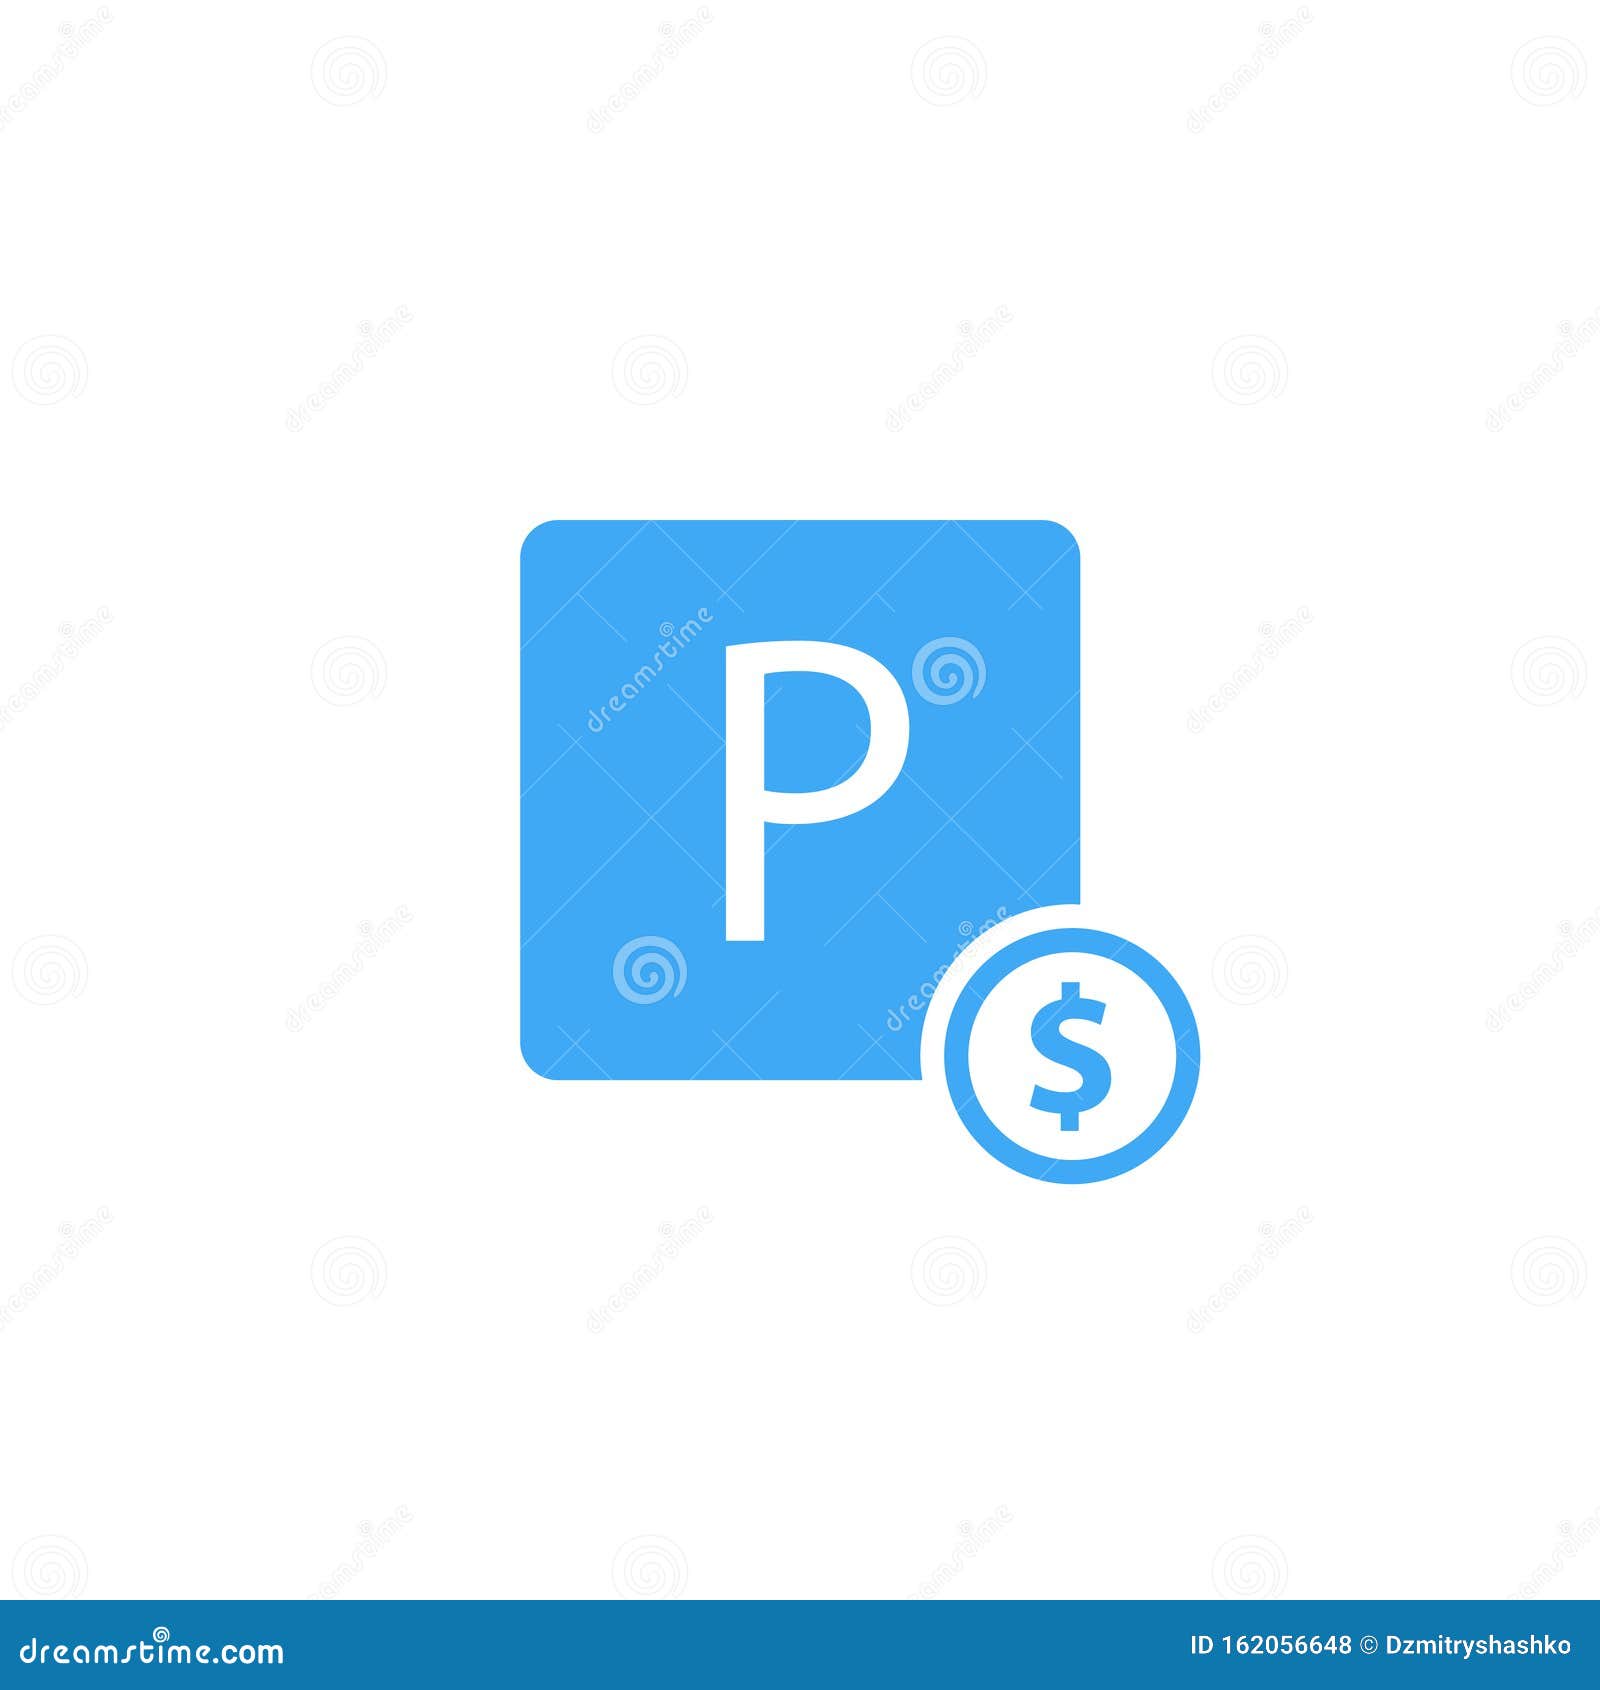 paid parking sign icon